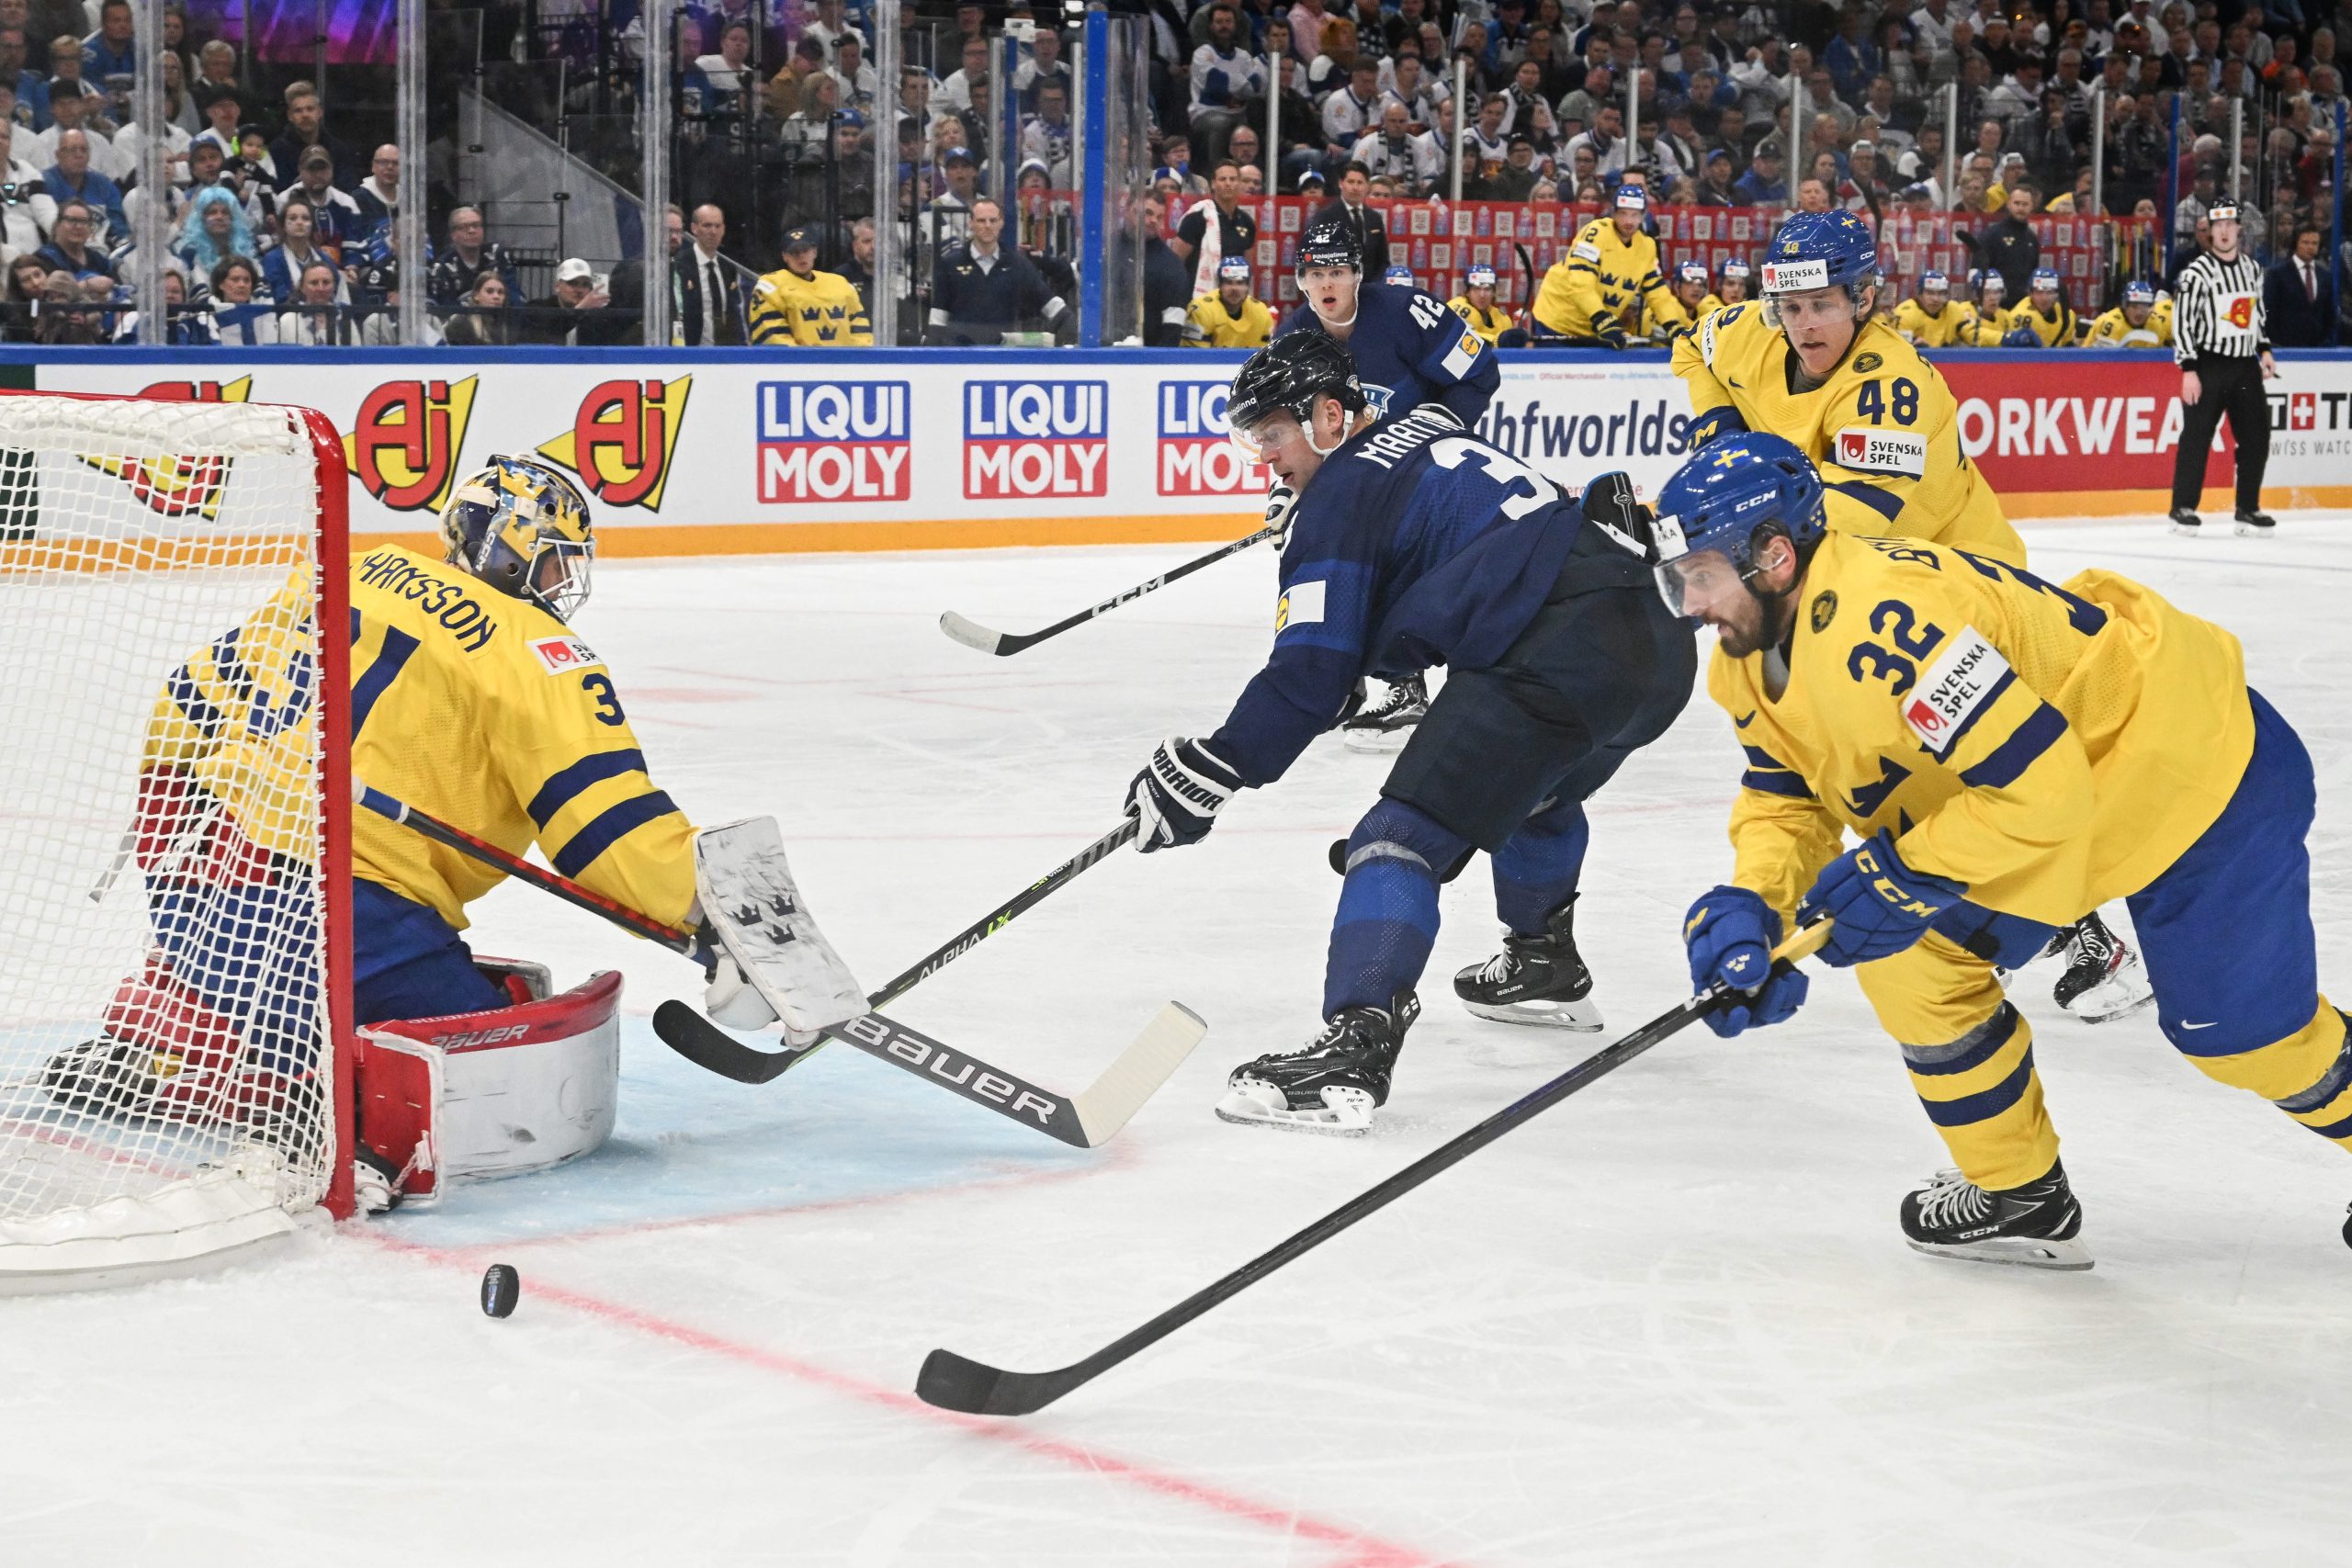 epa10630042 Goalkeeper Lars Johansson (L)  and Lukas Bengtsson (R) from Sweden and Olli Maatta from Finland in action during the IIHF 2023 Ice Hockey World Championship first round group A match between Sweden and Finland in Tampere, Finland, 15 May 2023  EPA/KIMMO BRANDT